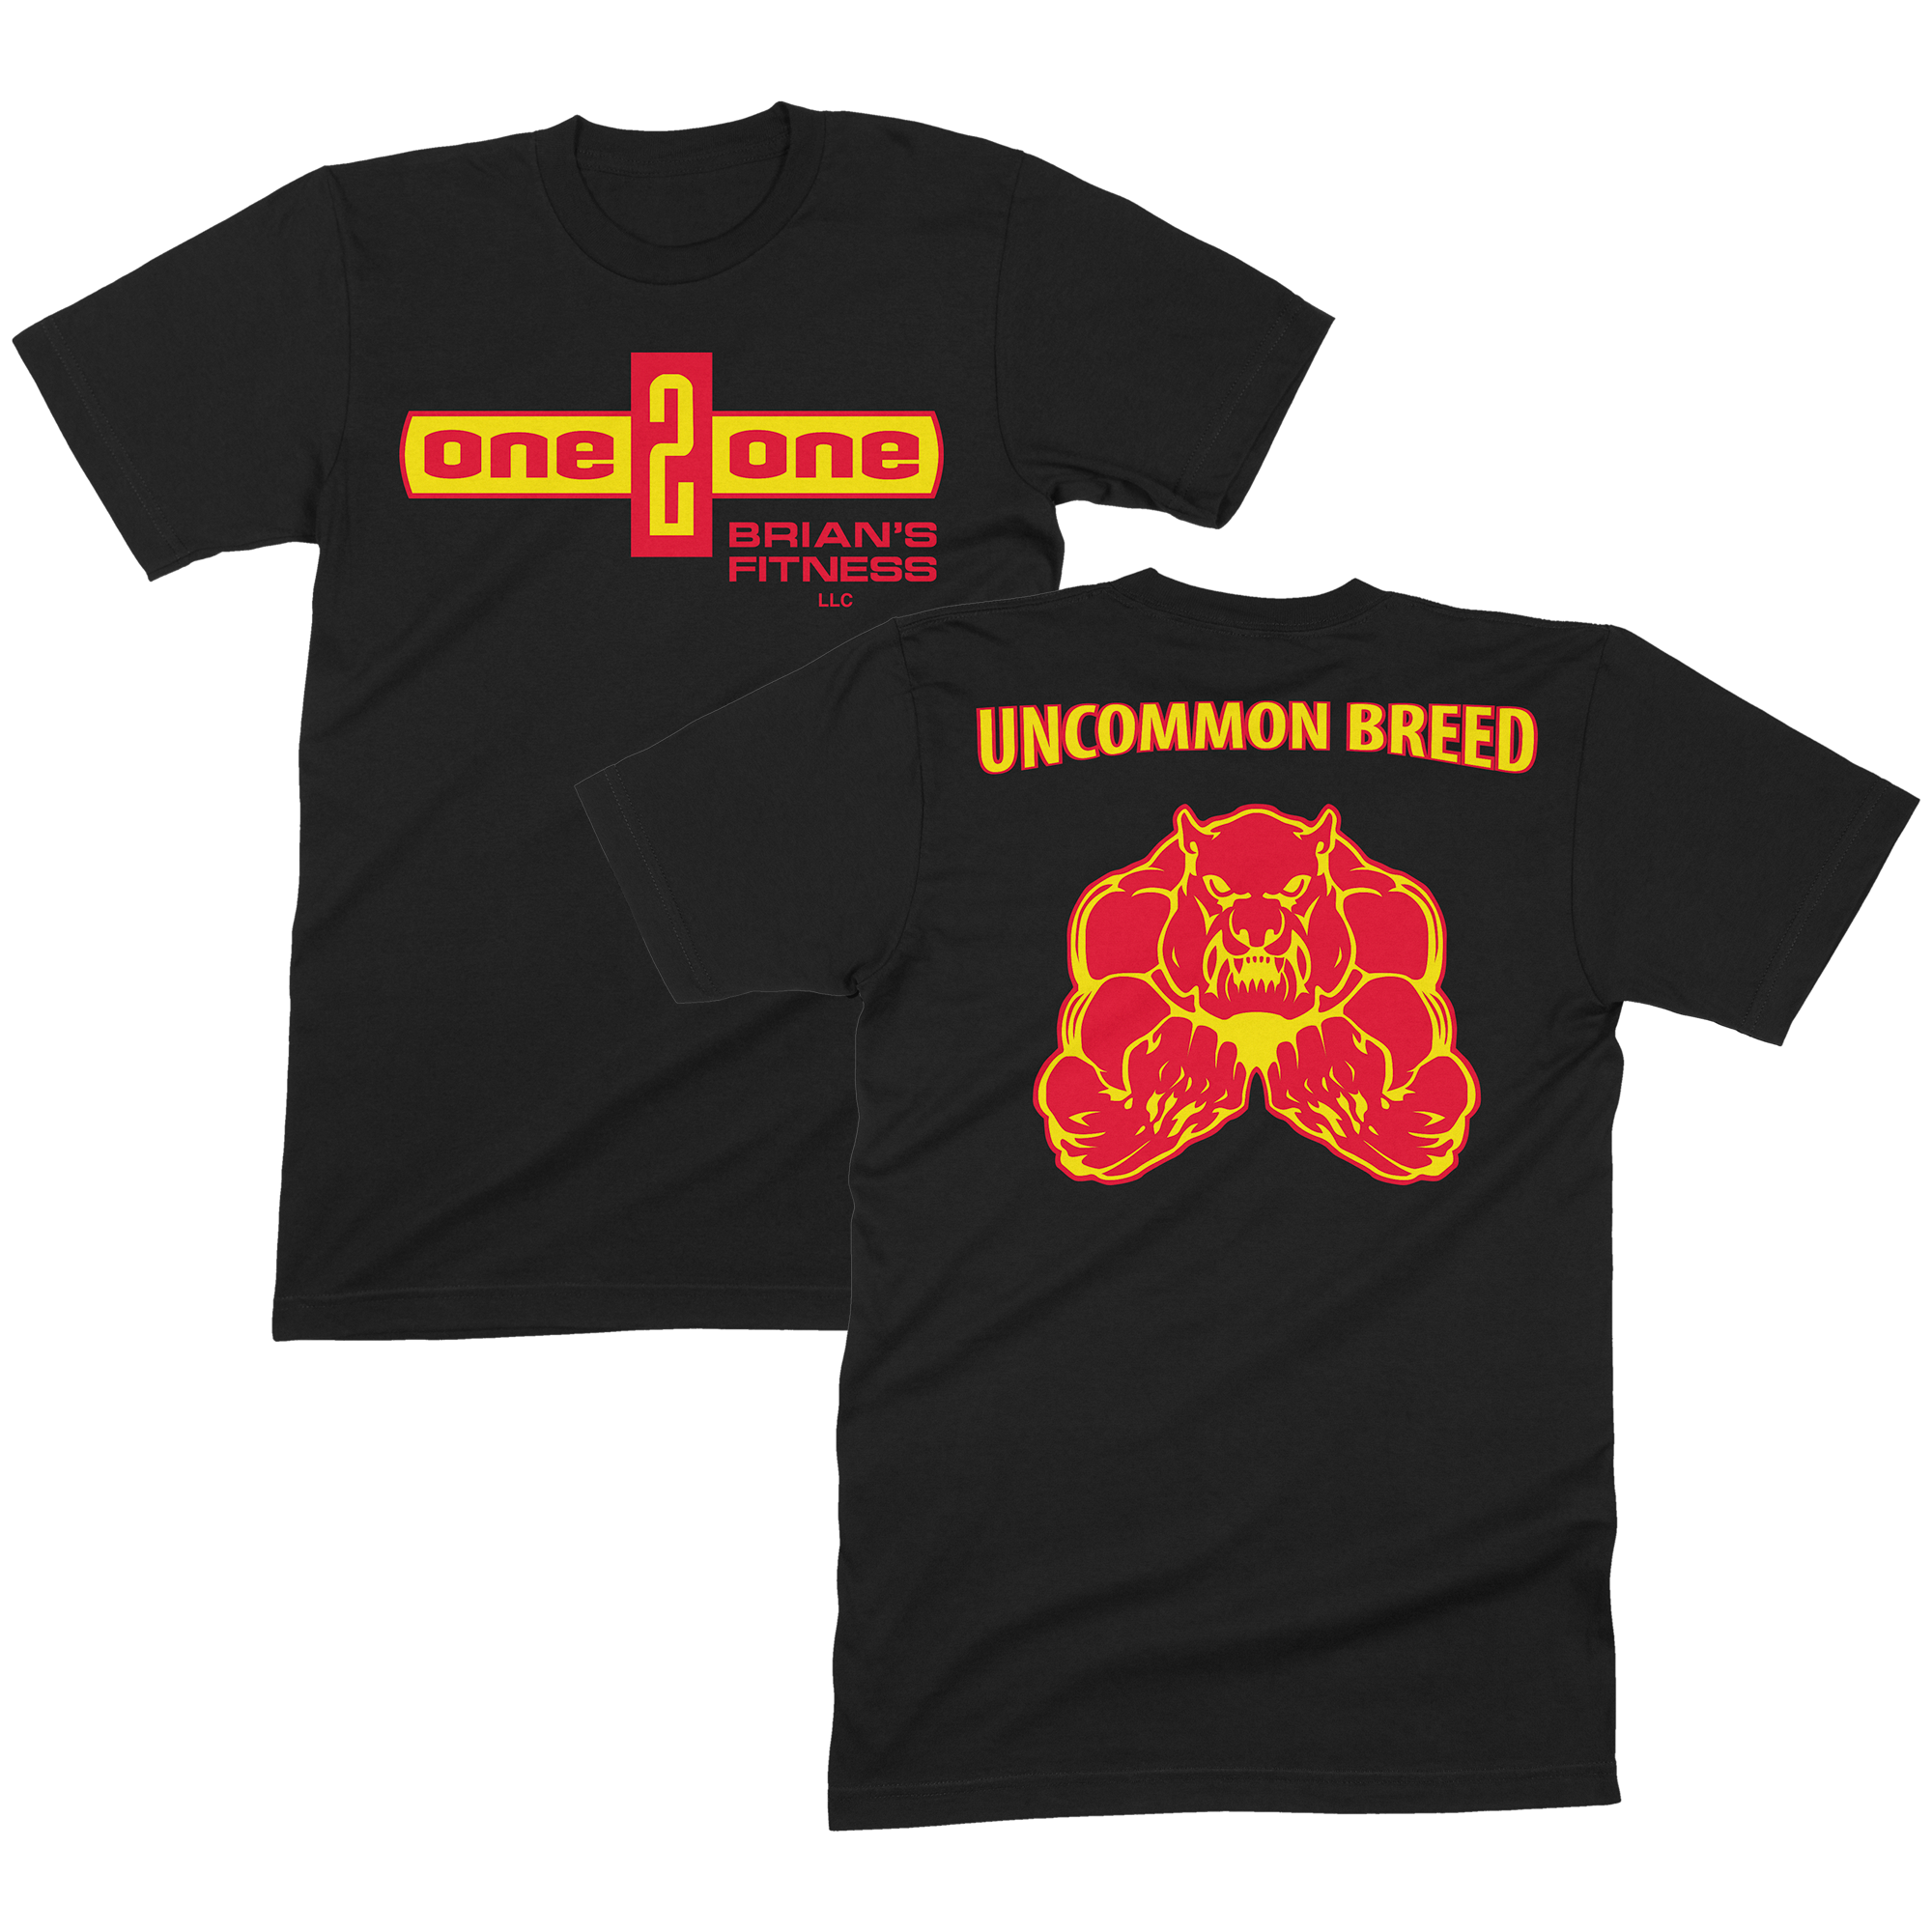 One 2 One Fitness - Uncommon Breed Unisex Shirt